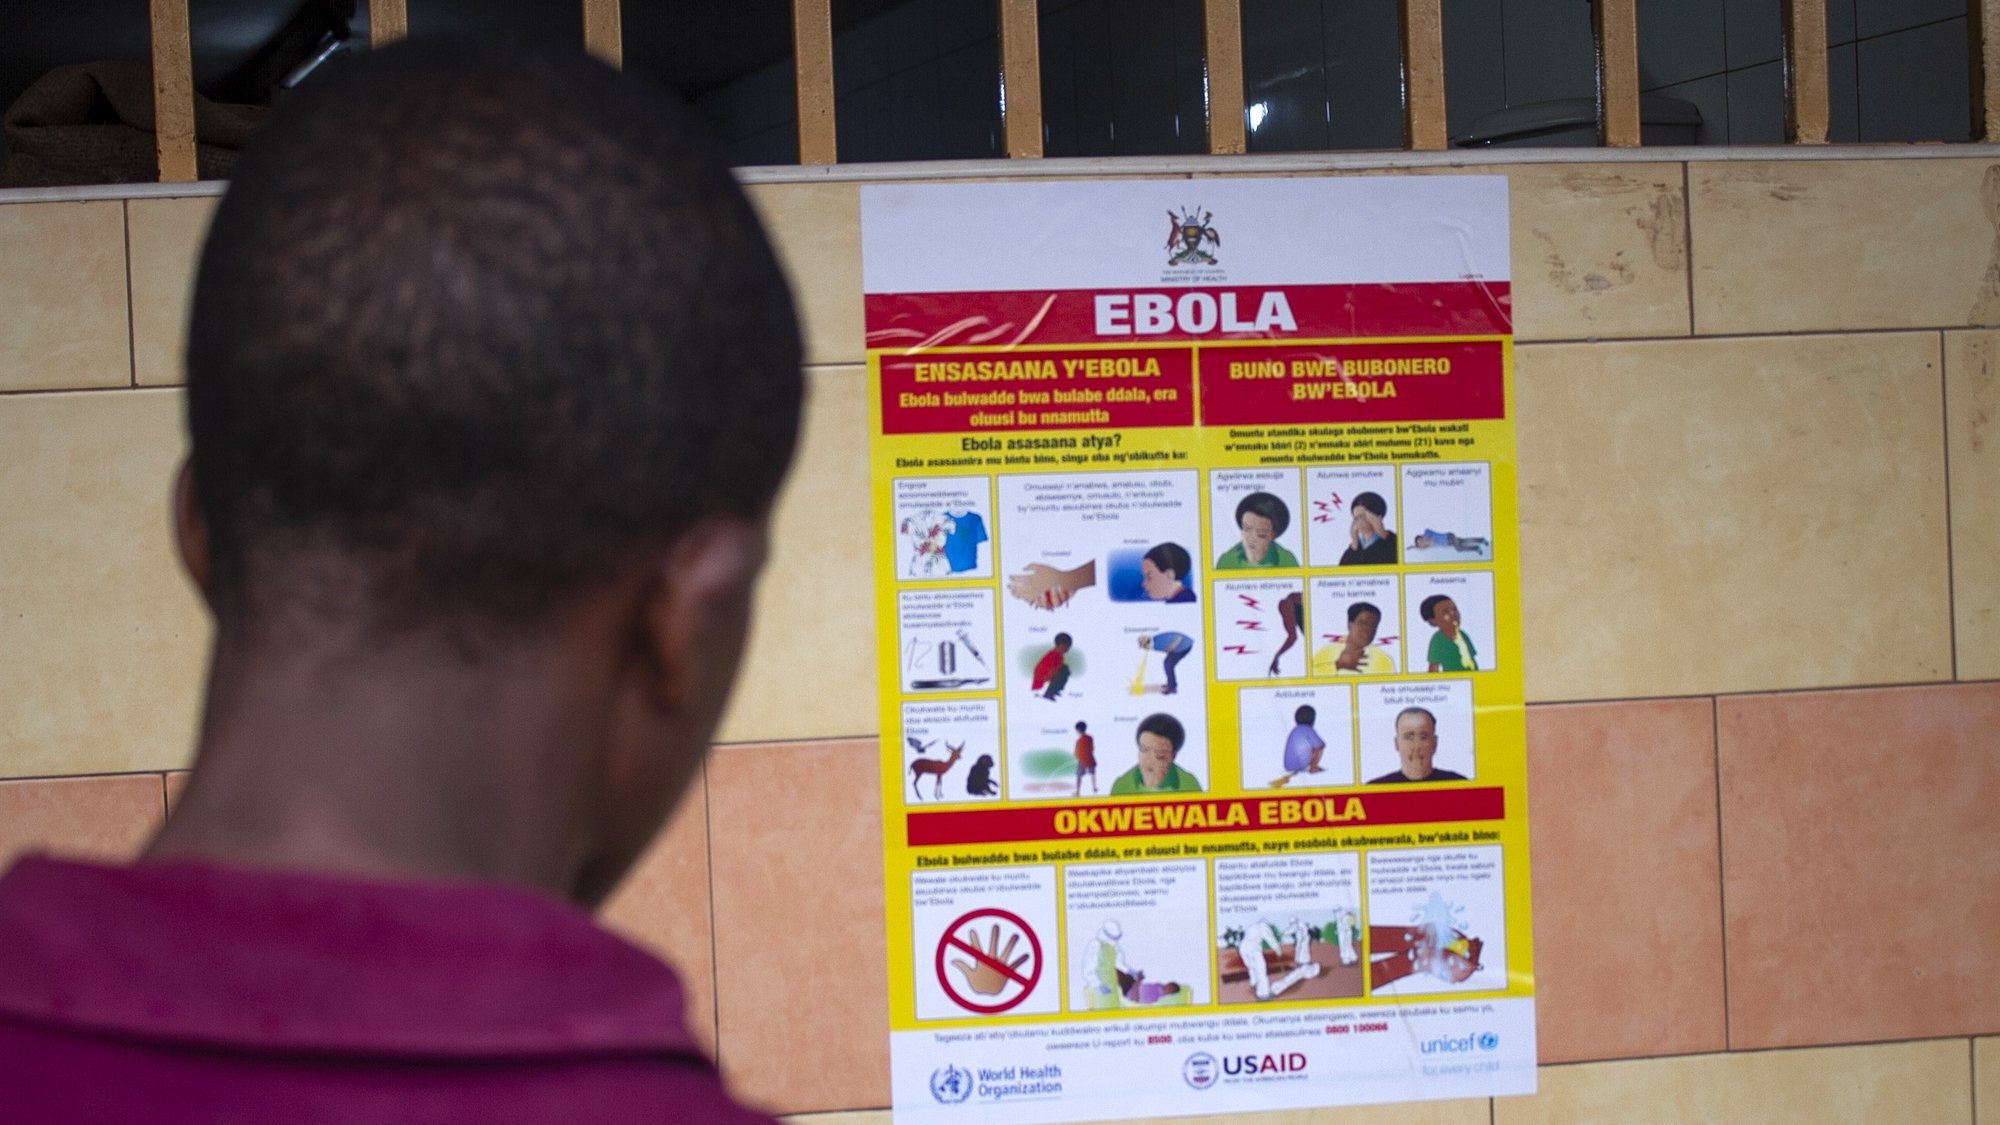 epa10212386 A man looks at an Ebola virus disease awareness campaign poster following an outbreak of Ebola in Uganda, in Kampala, Uganda, 28 September 2022. According to Uganda&#039;s Health Ministry, Ebola infections have risen across some districts in Uganda with the number of confirmed and suspected deaths at 36. The president addressed the nation on measures the government is putting in place to mitigate the spread.  EPA/Stringer